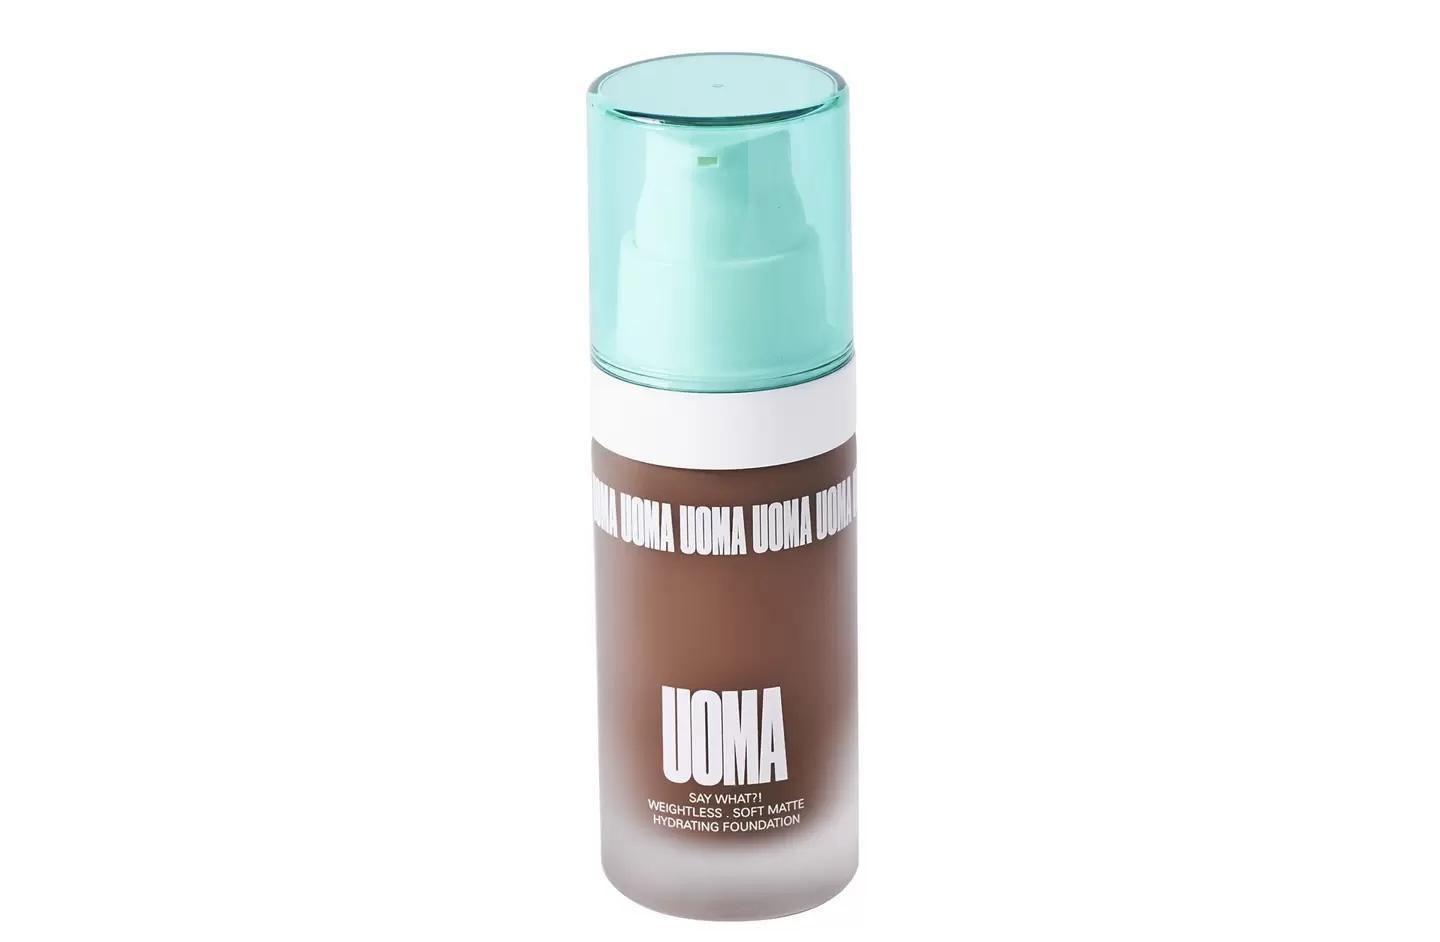 5. Uoma Say What?! Foundation